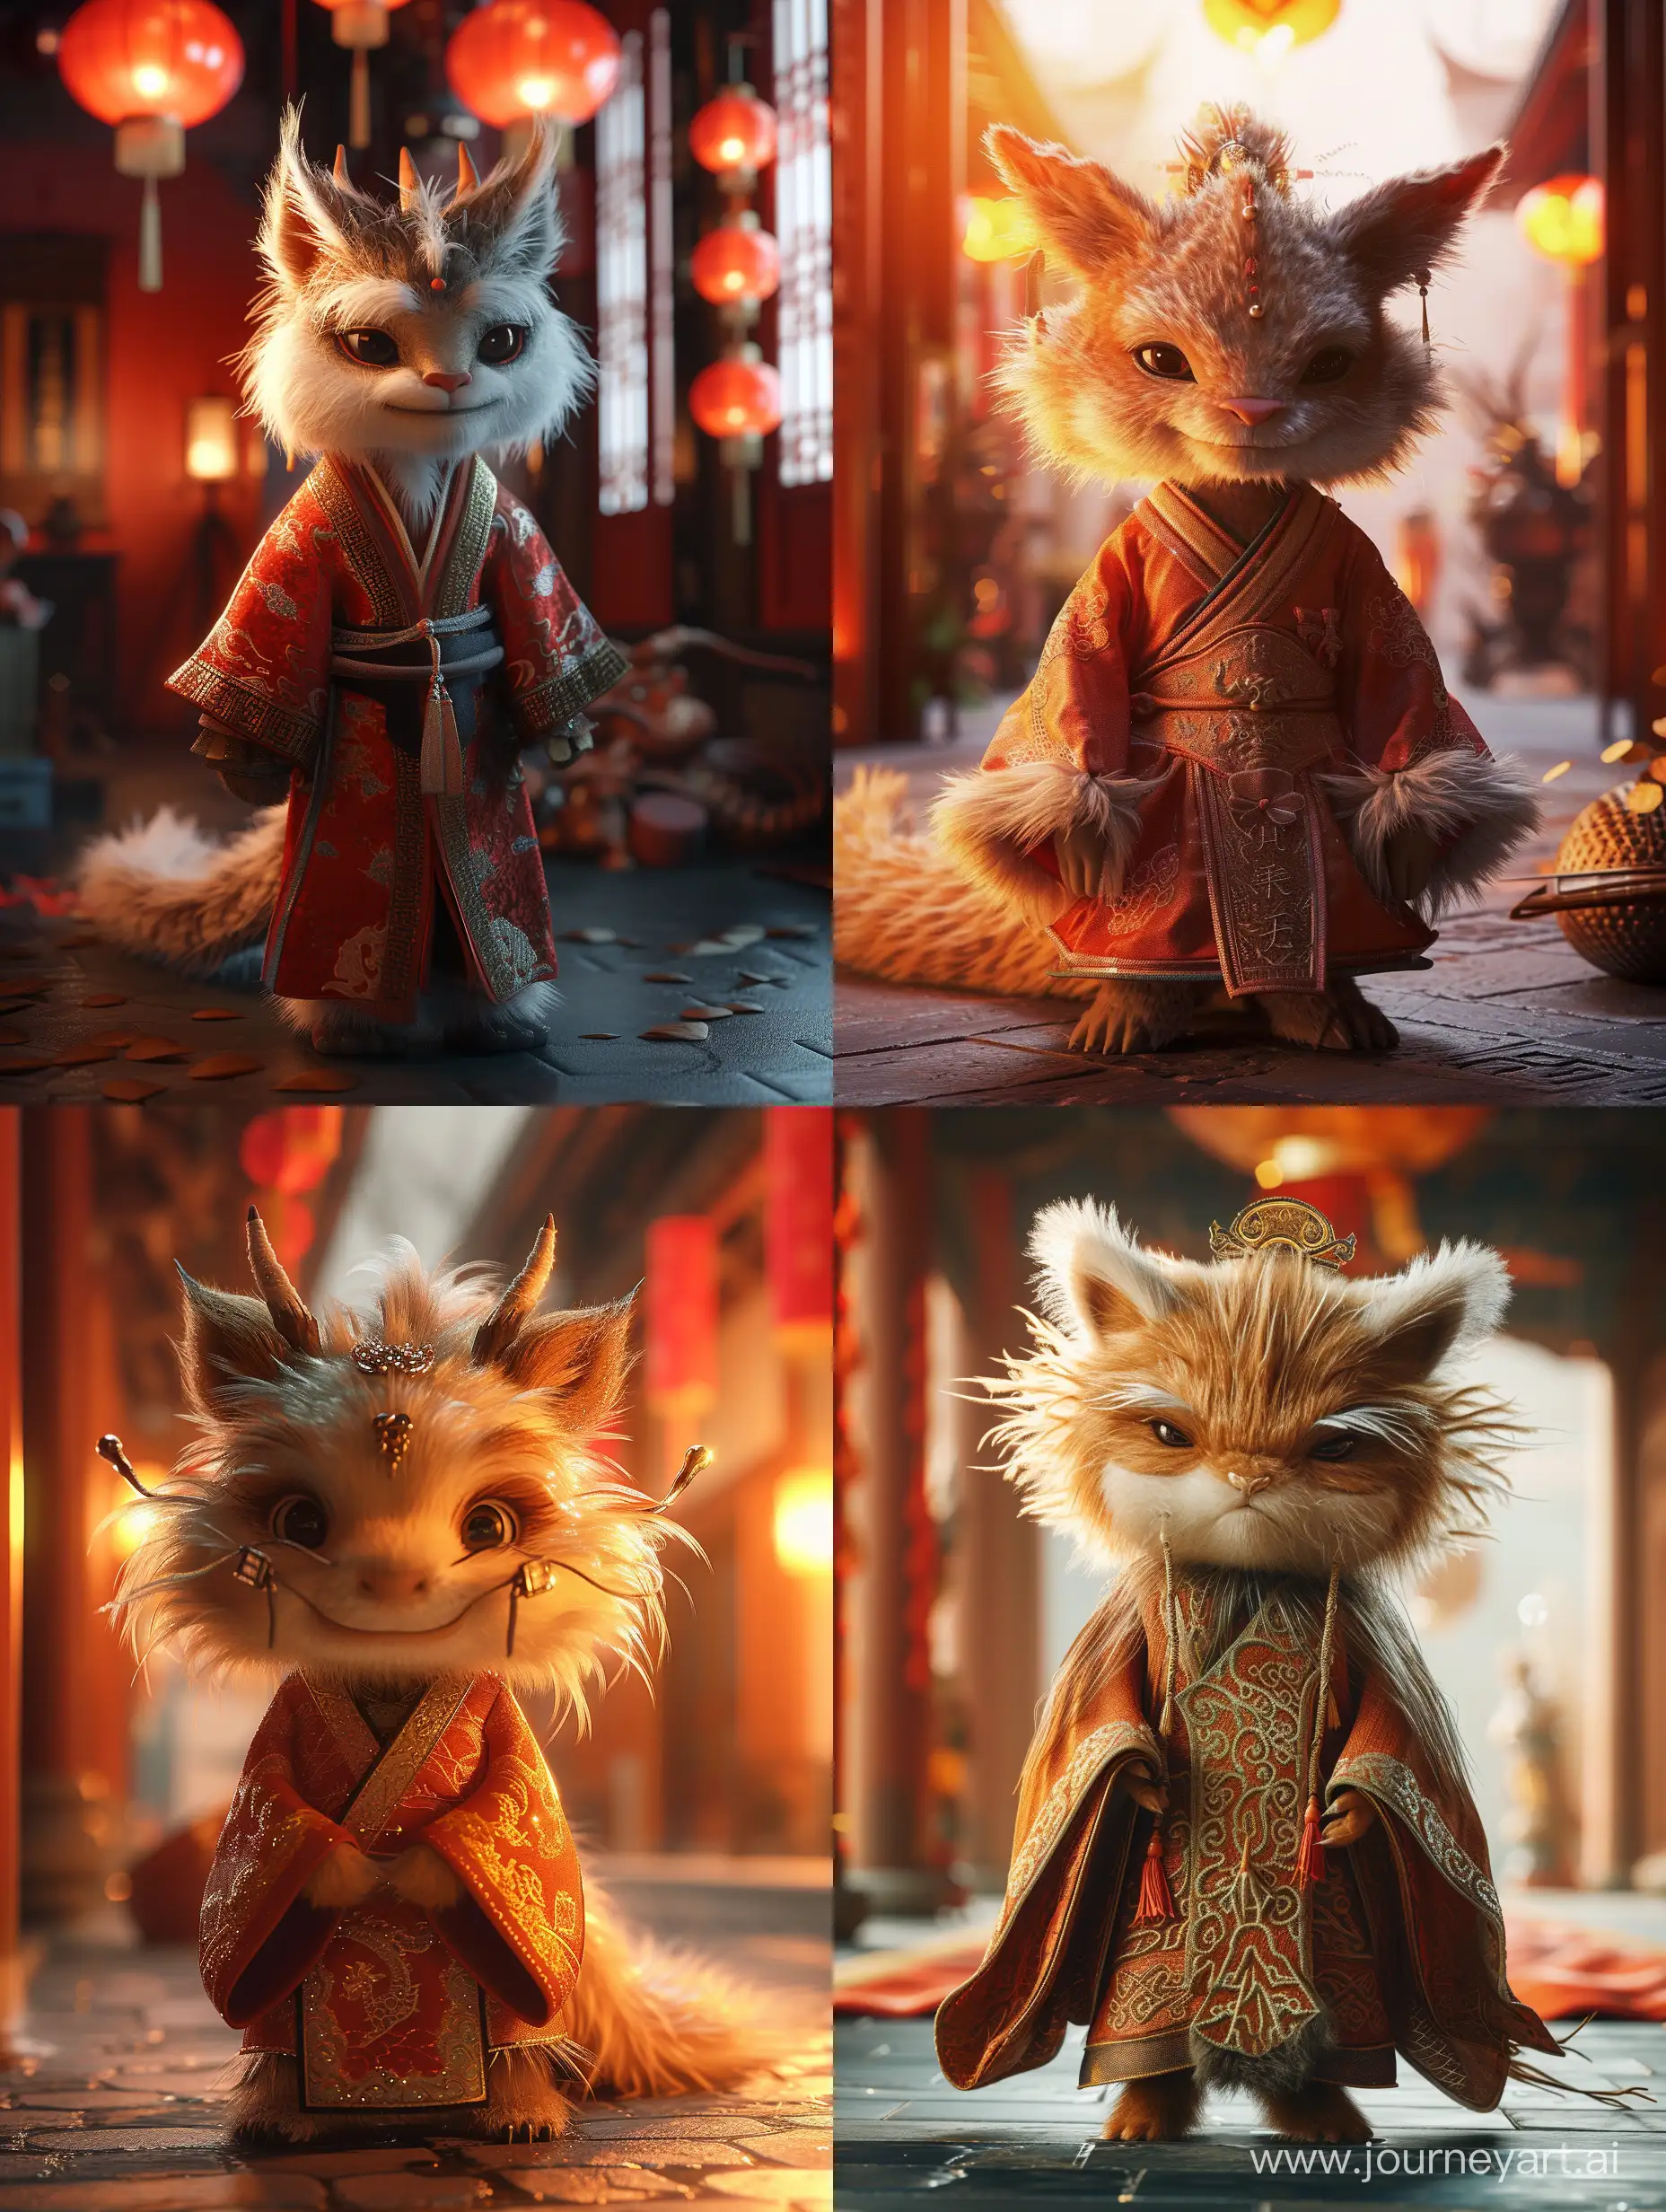 A cute and adorable Chinese dragon with a humanized appearance, dressed in traditional ancient Chinese robes, with fluffy fur, rendered in cute 3D animation style using OC rendering and C4D. The scene is enhanced with stunning lighting effects using ray tracing technology, resulting in an 8K HDR best quality image. 